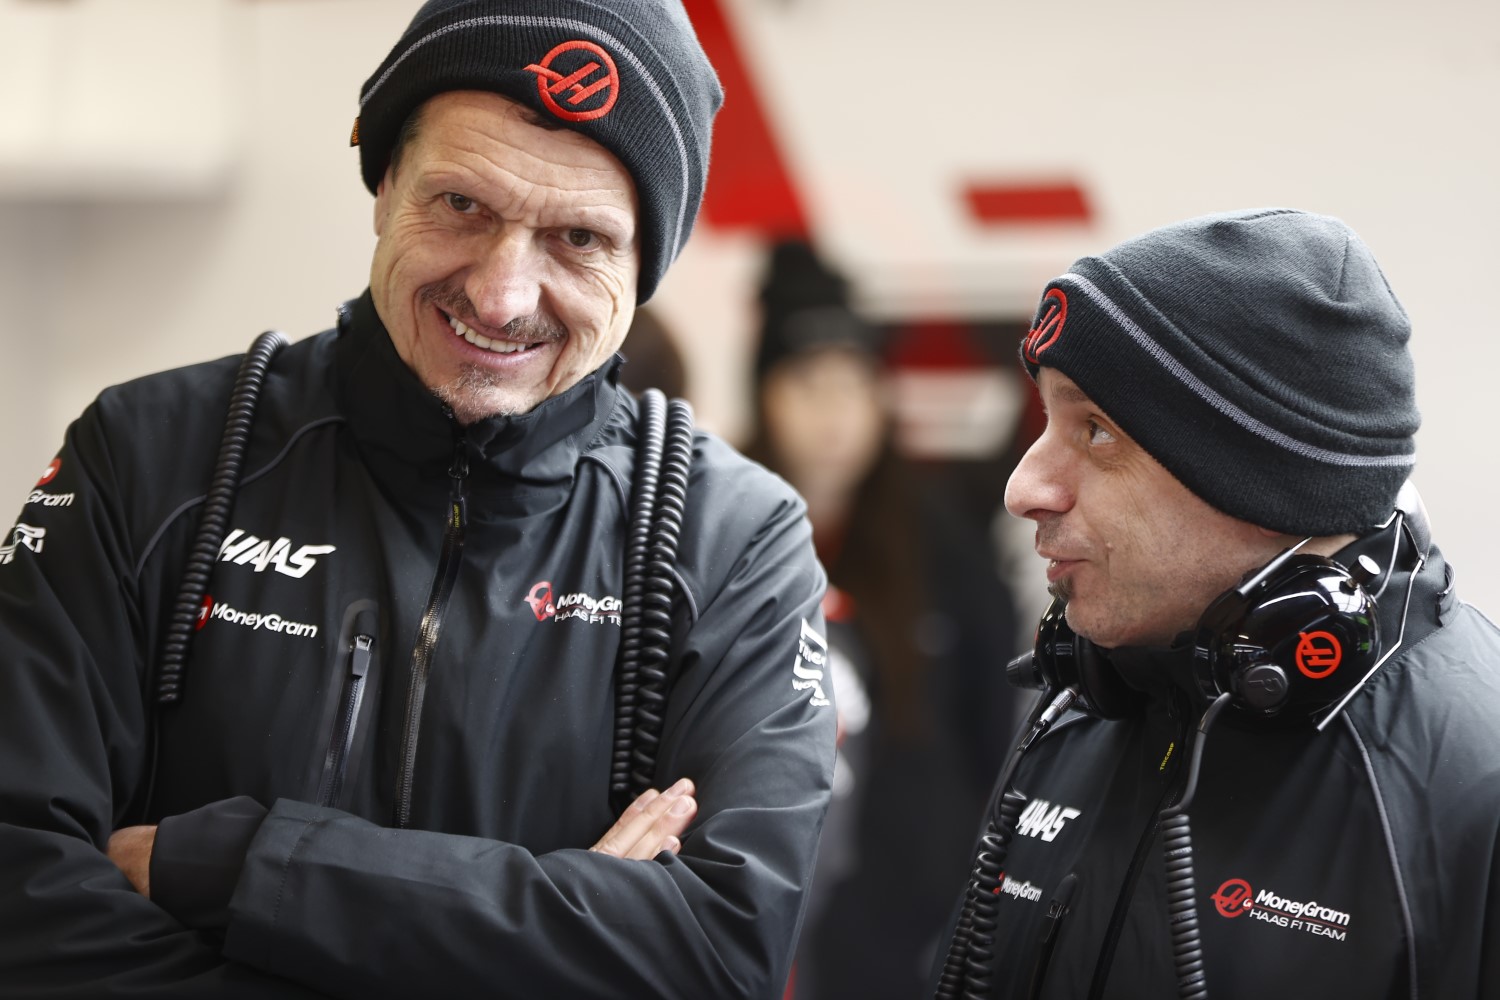 Haas team boss Guenther Steiner talks to Haas Chief Design Engineer Simone Resta - photo by LAT/Andy Hone